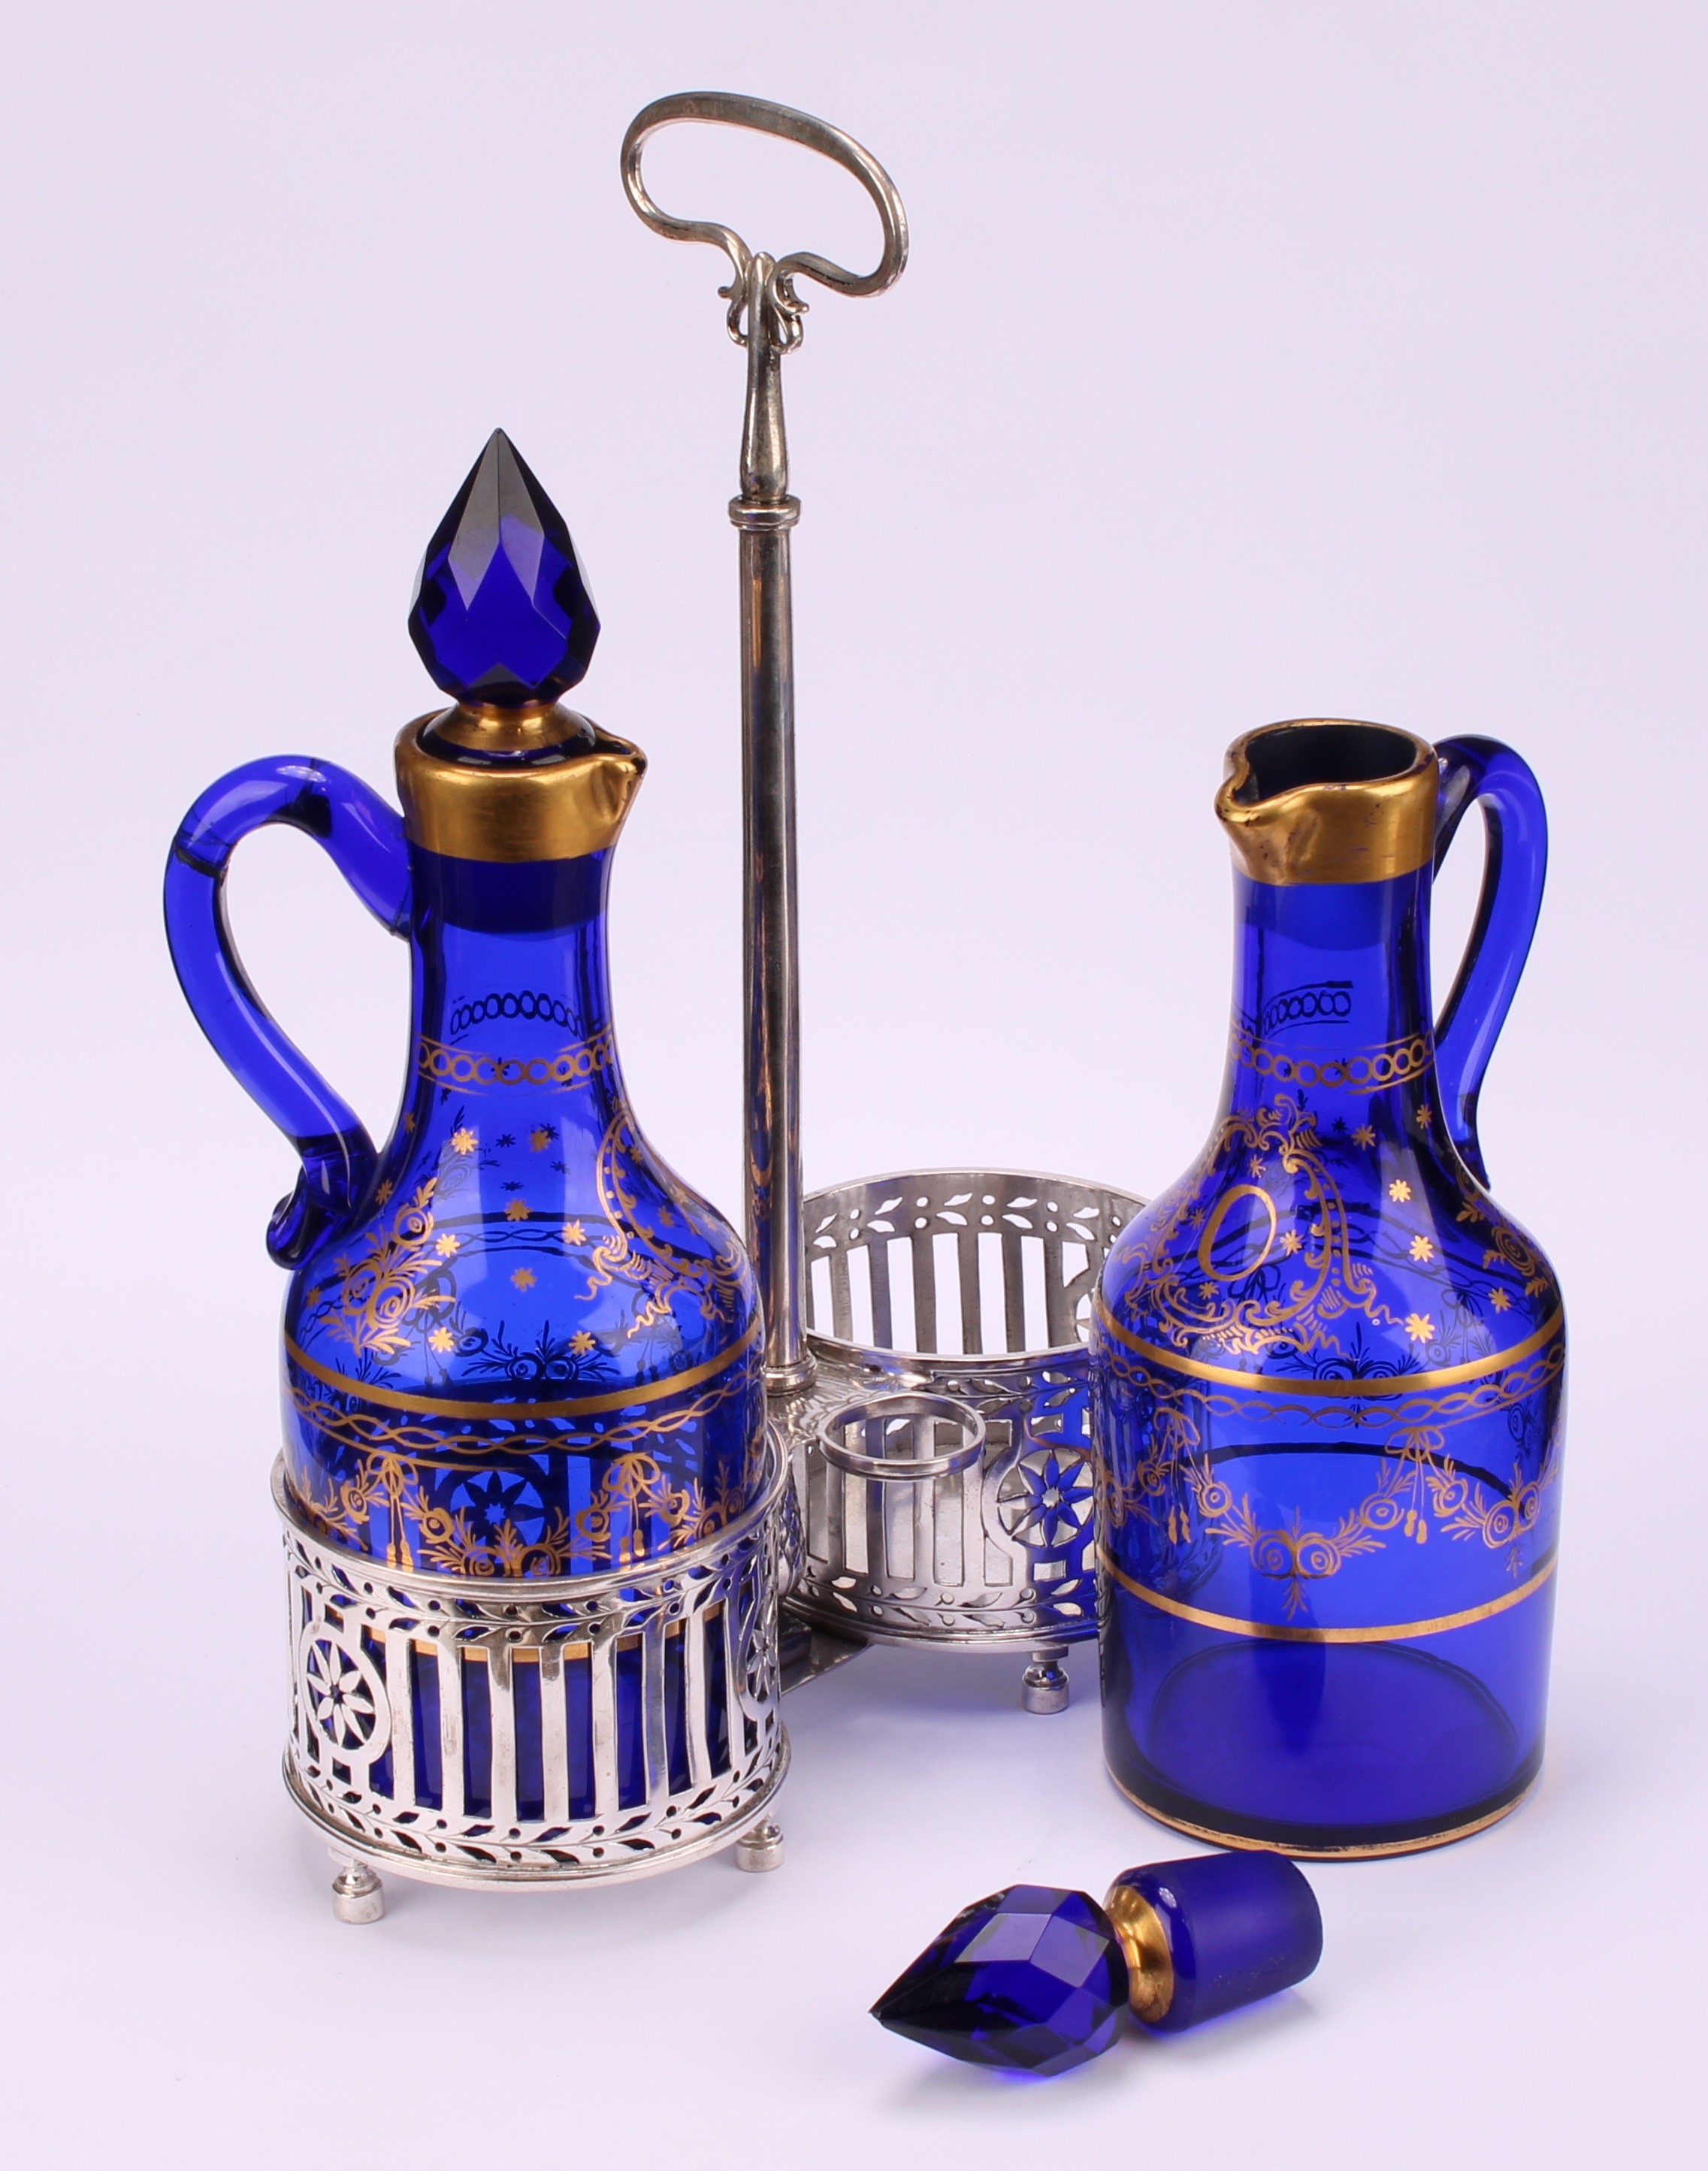 A 19th century Belgian silver two-bottle oil and vinegar cruet, gilded blue glass decanters and - Image 4 of 4